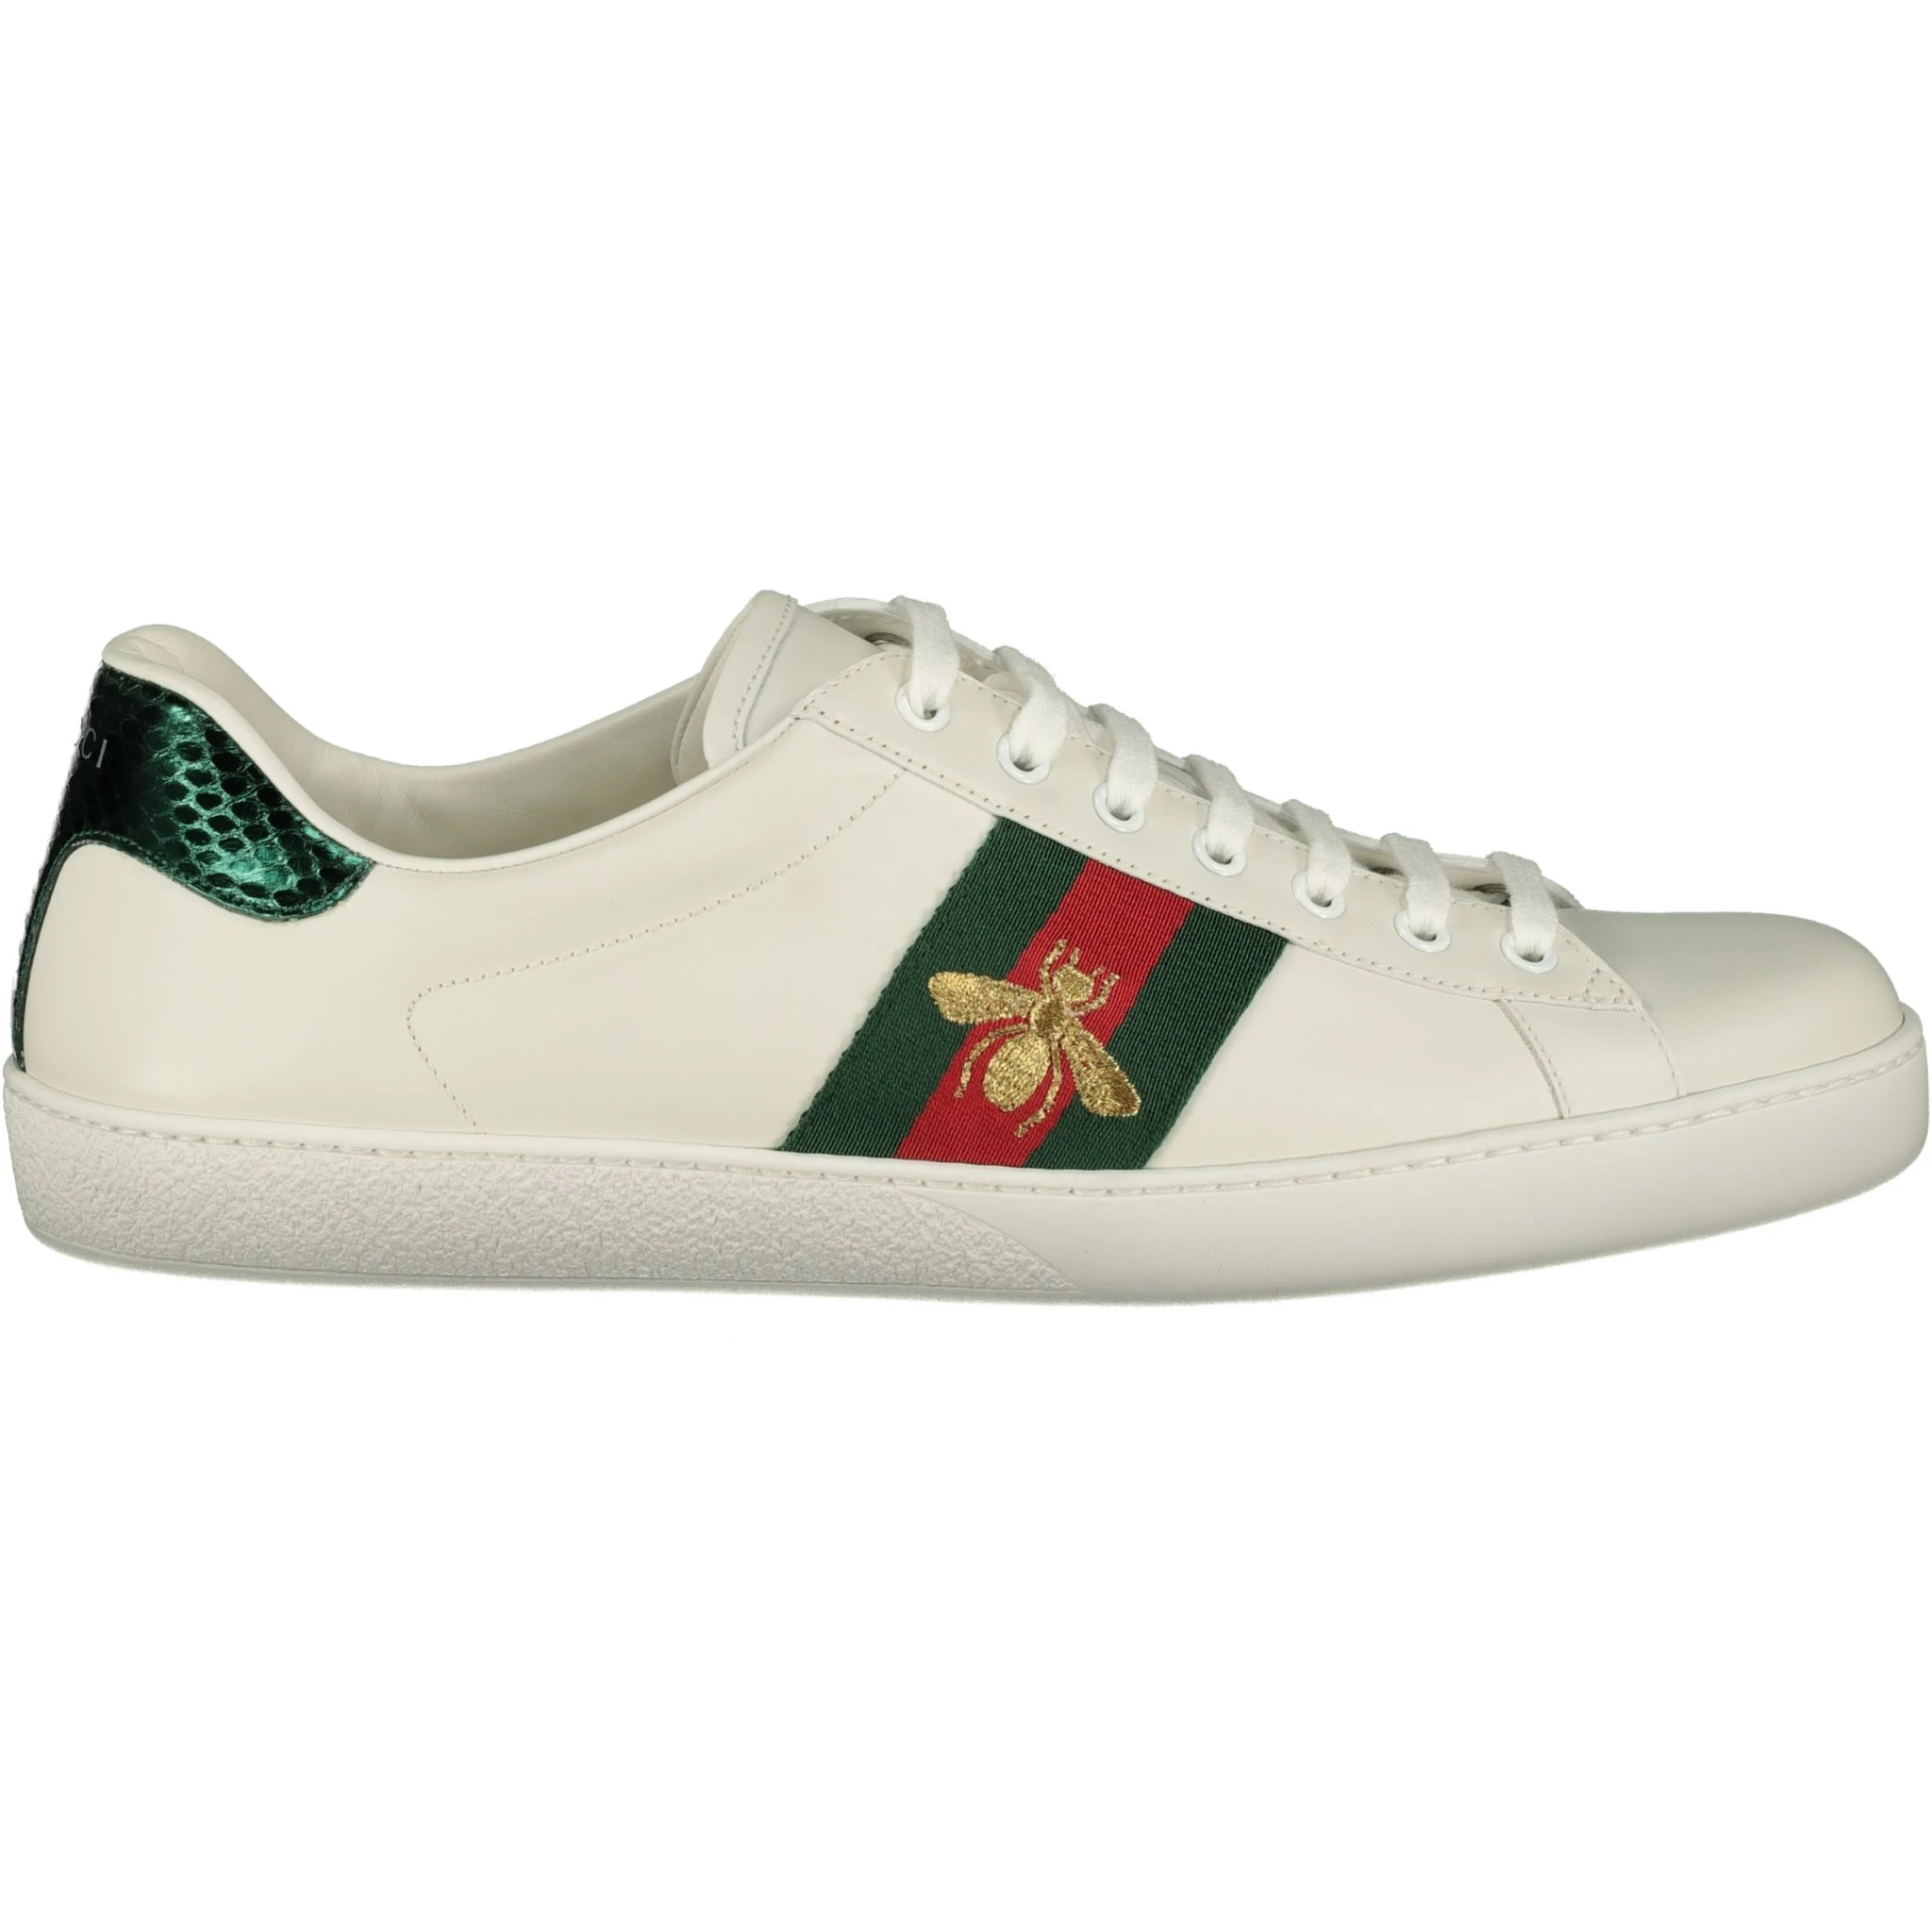 Gucci Ace Bee Logo Low Trainers | eBay